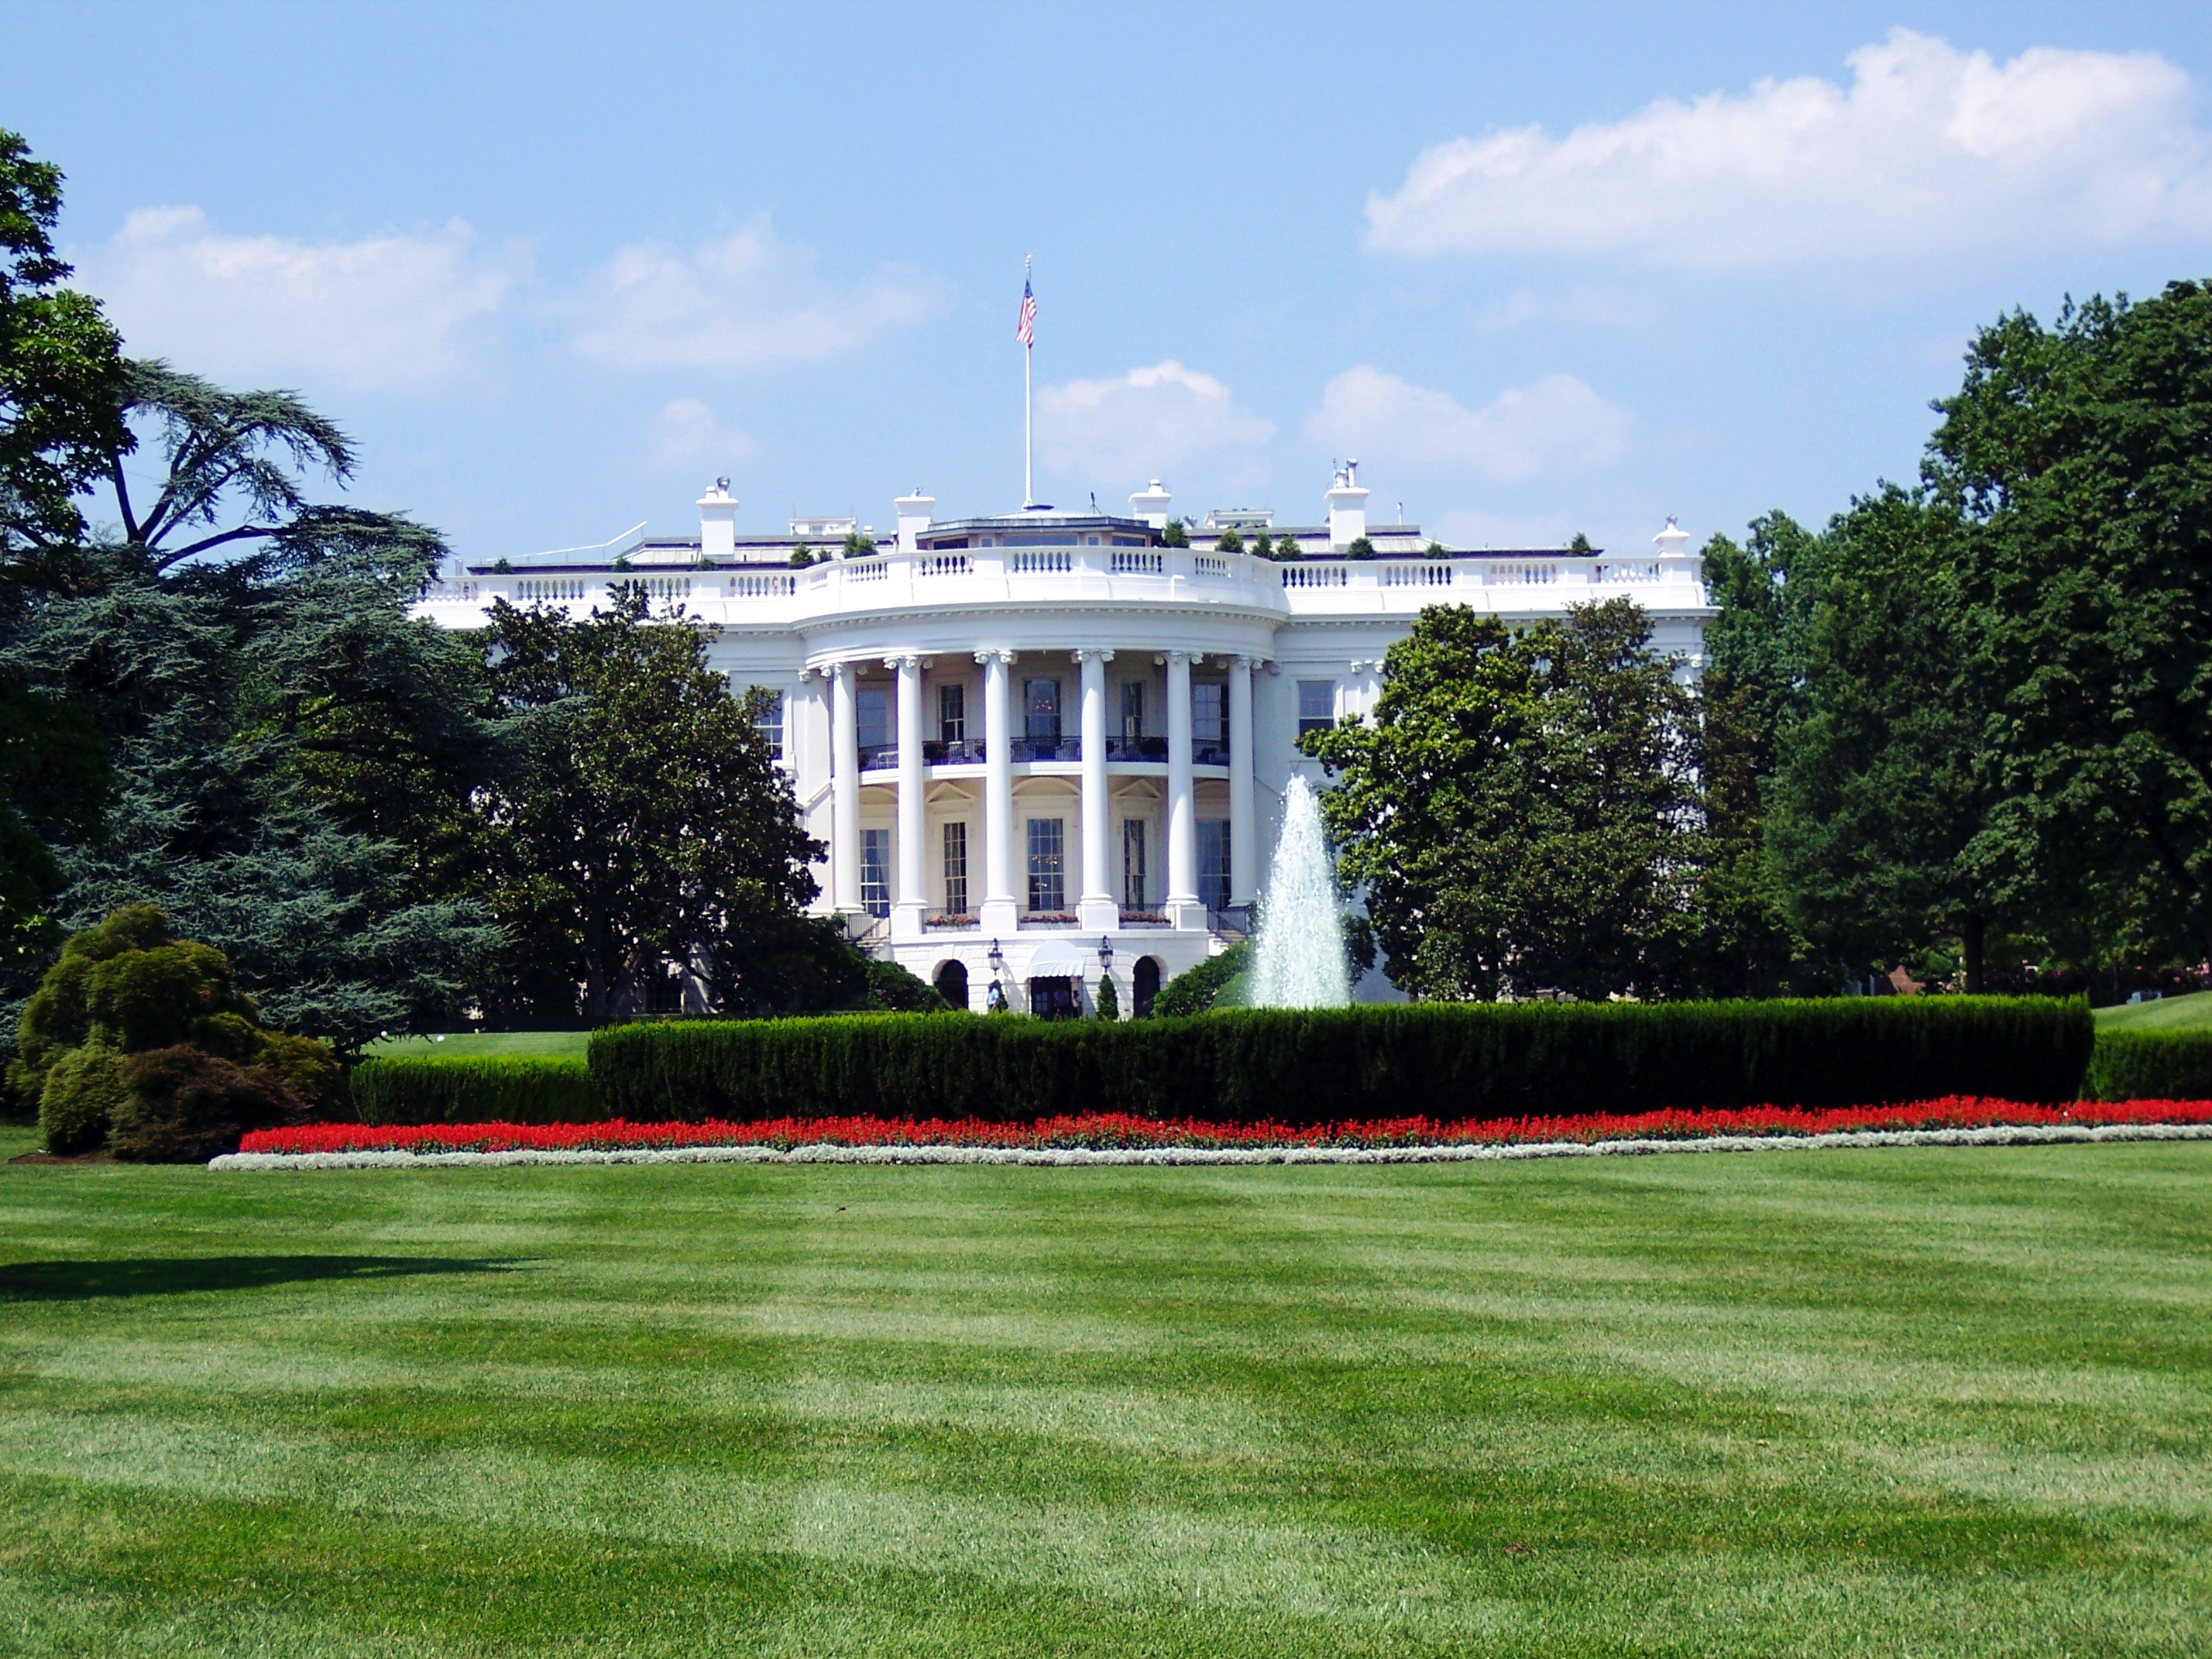 The White House is located in America's political capital | Photo by Aaron Kittredge from Pexels